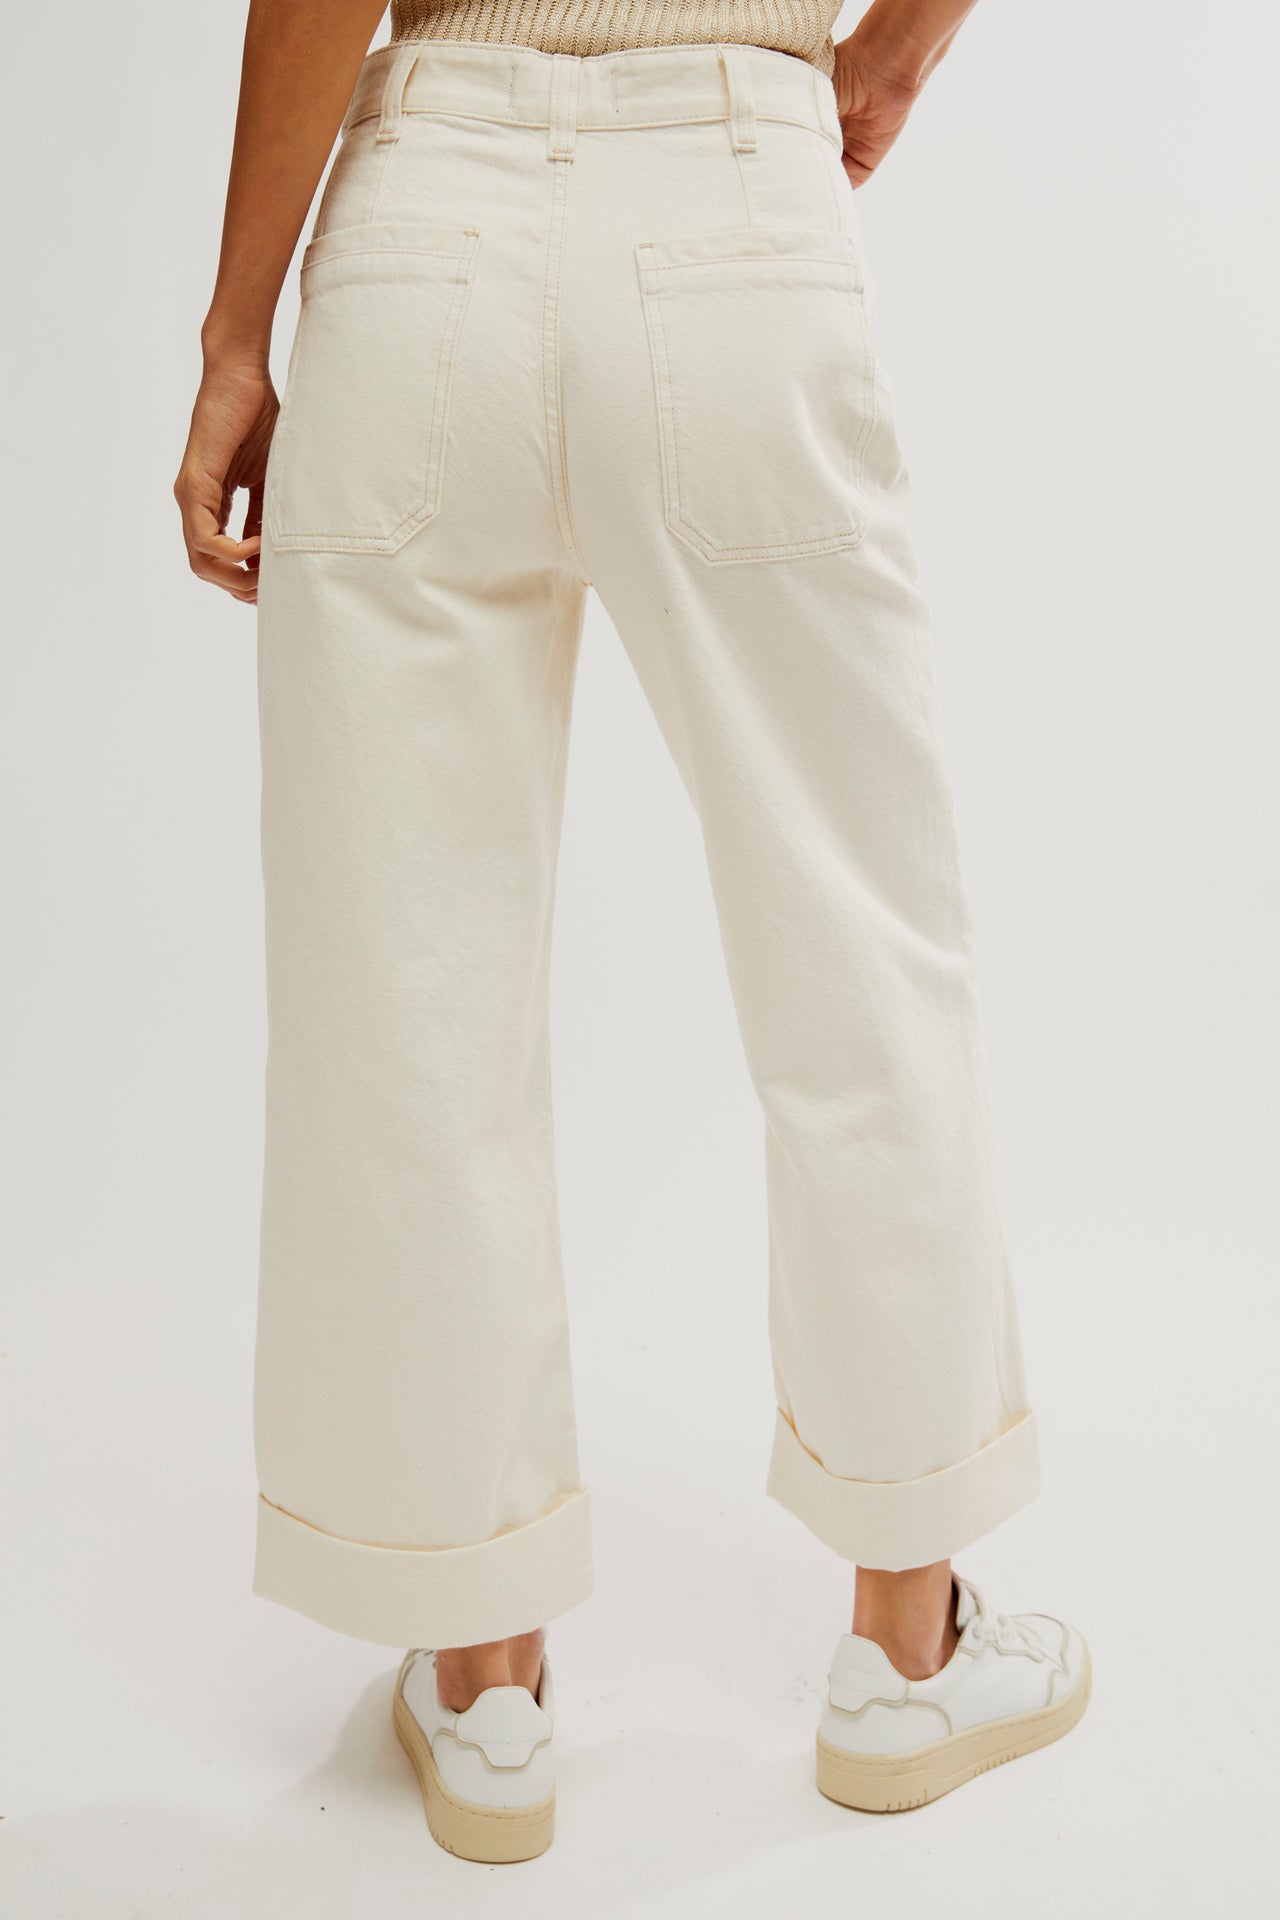 Palmer Cuffed Jean Eggshell, Flare Denim by Free People | LIT Boutique